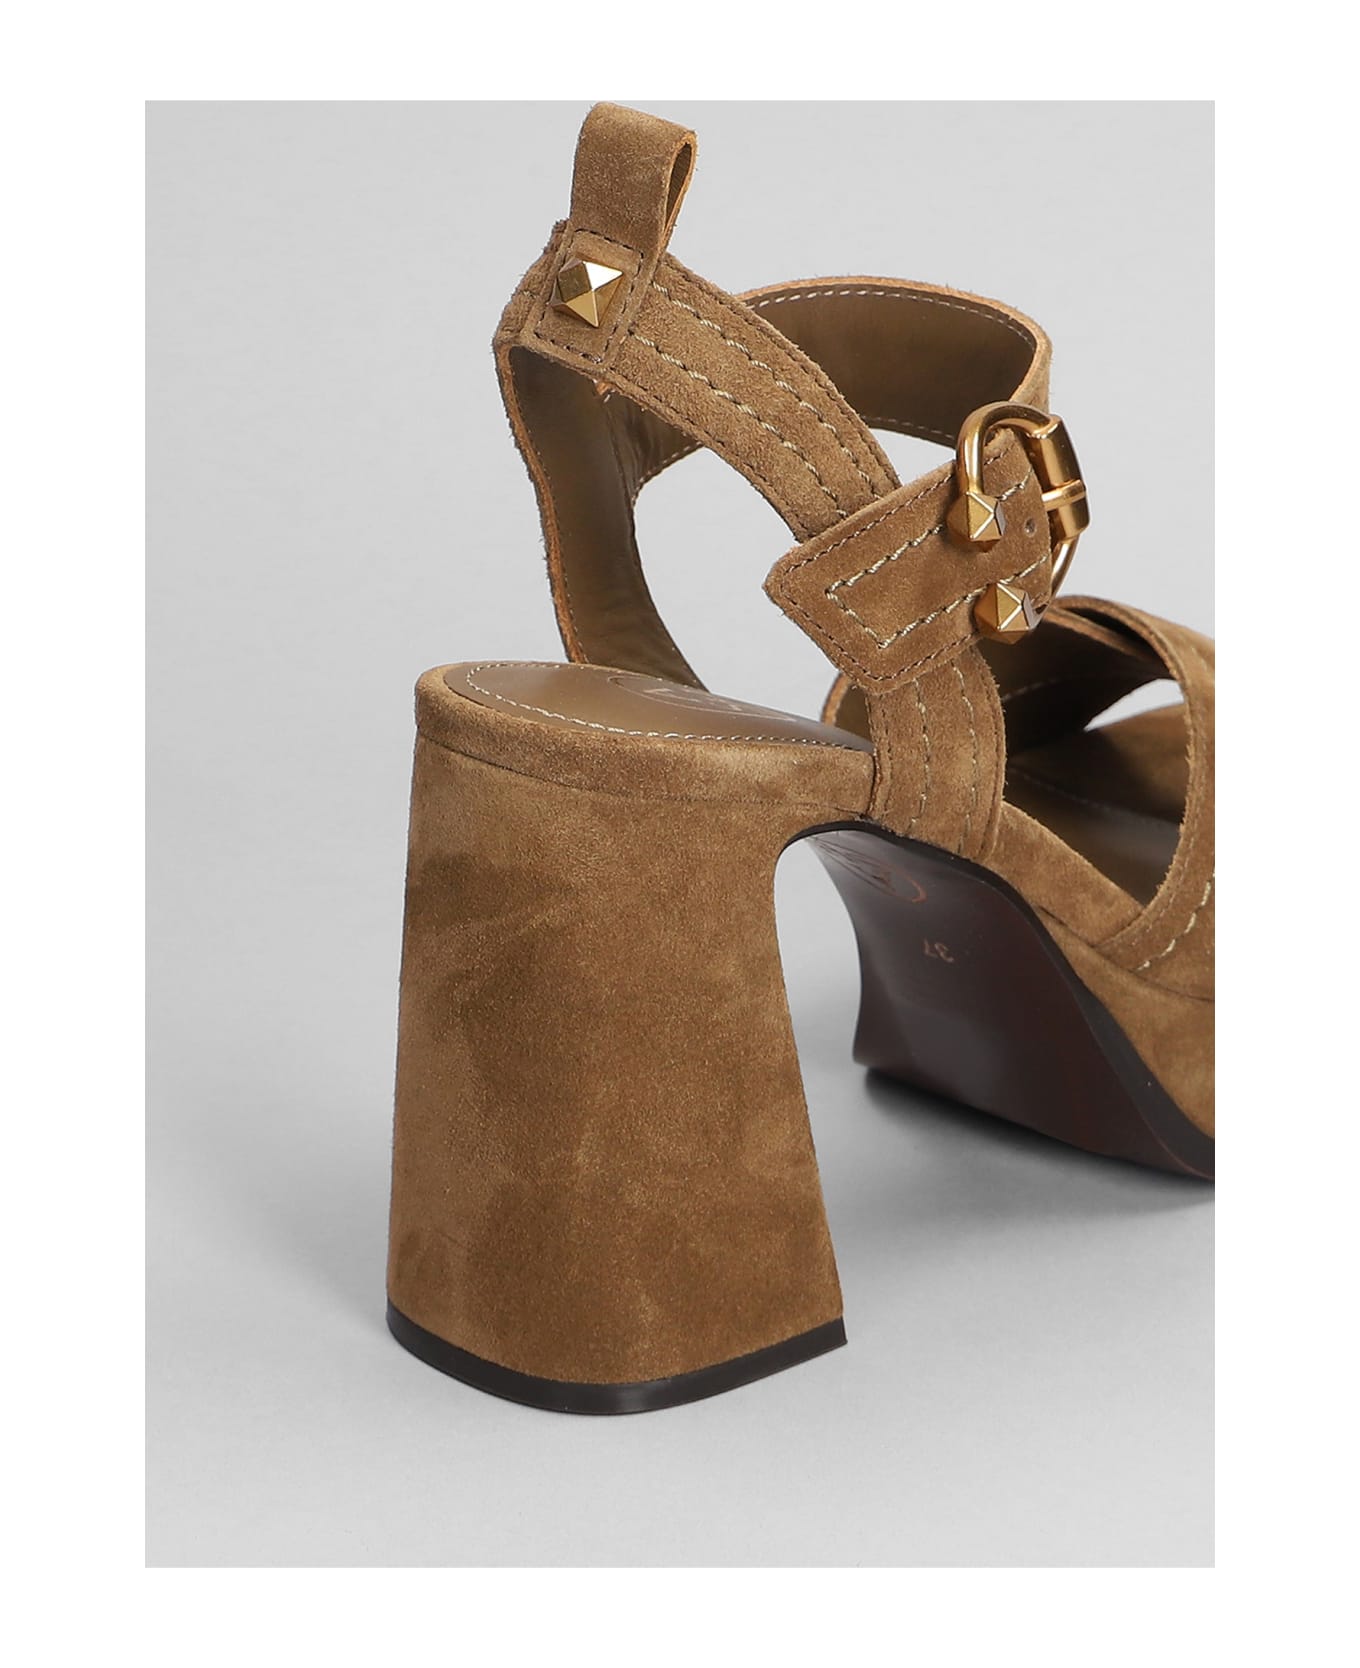 Ash Melany Sandals In Brown Suede - brown サンダル